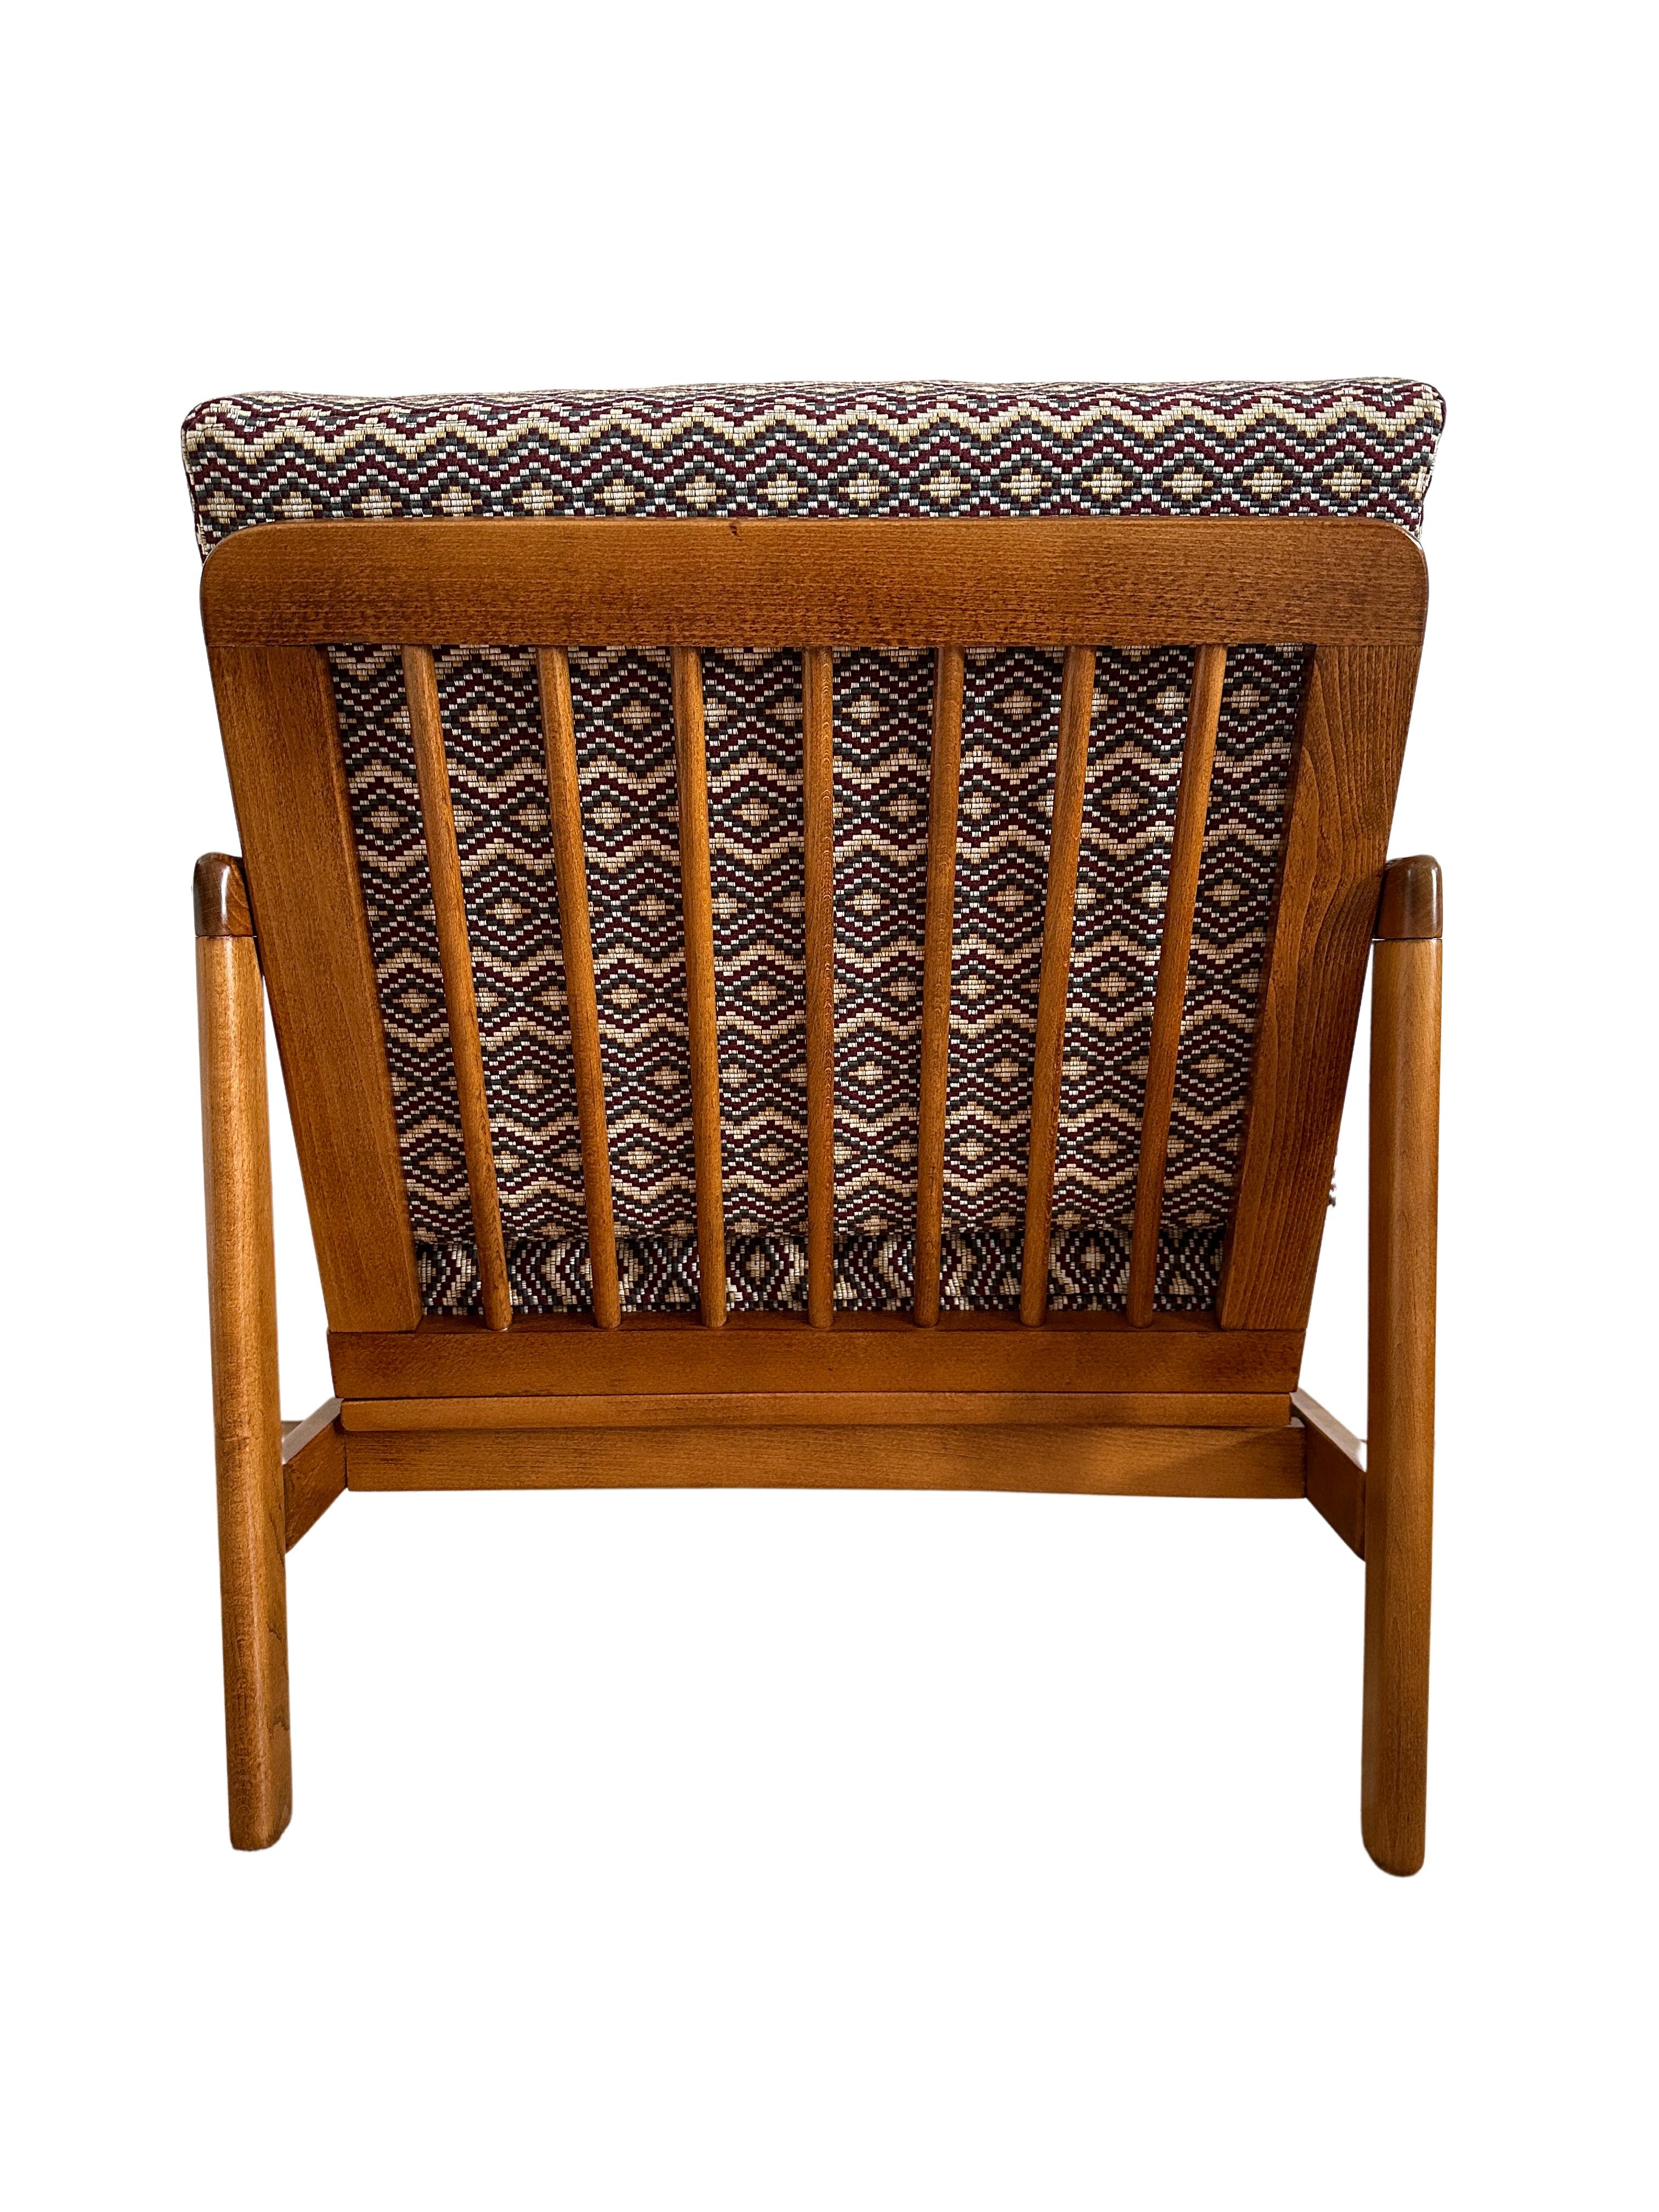 20th Century Midcentury Armchair, in Geometric and Ethnic Fabric, Europe, 1960s For Sale